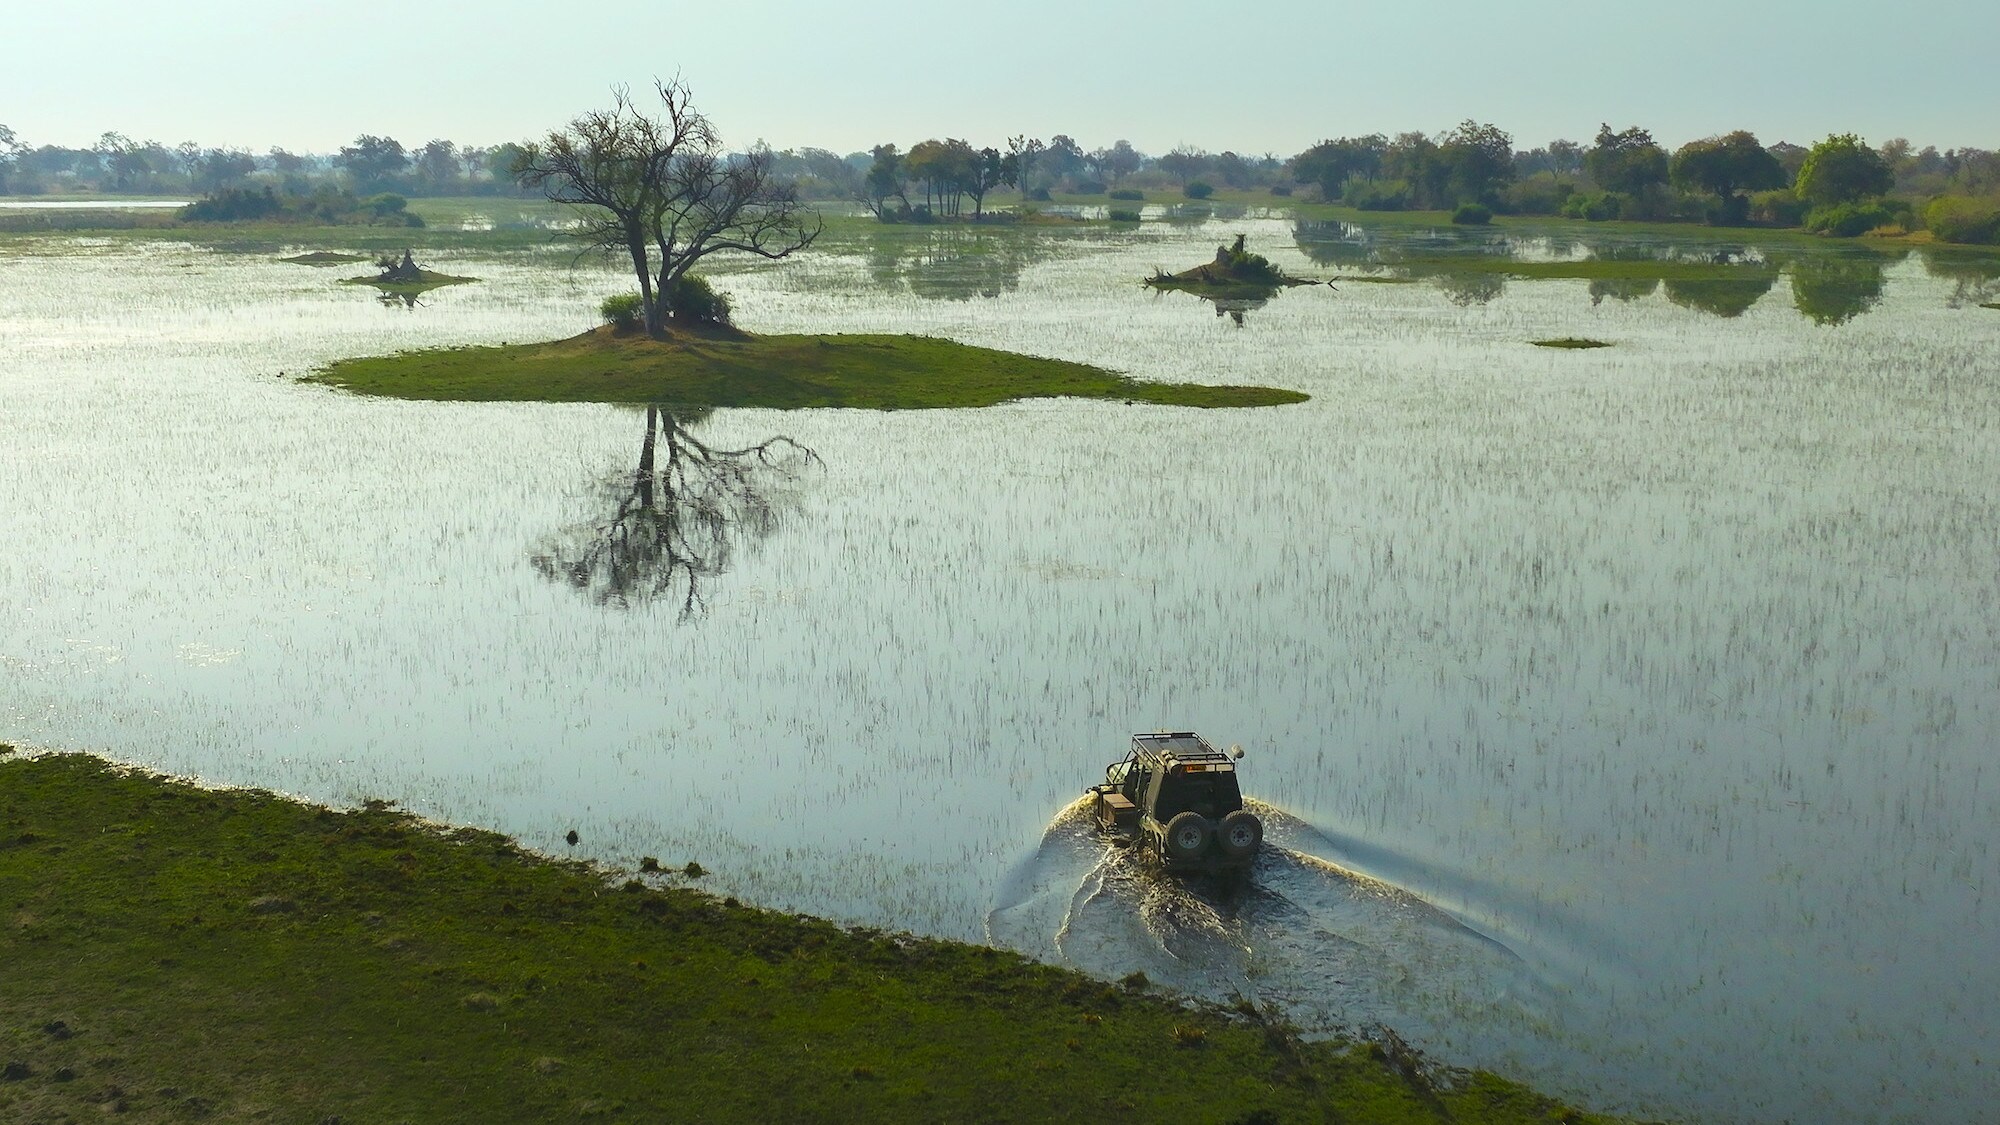 4x4 driving through the flooded plain. (National Geographic for Disney+/Bertie Gregory)